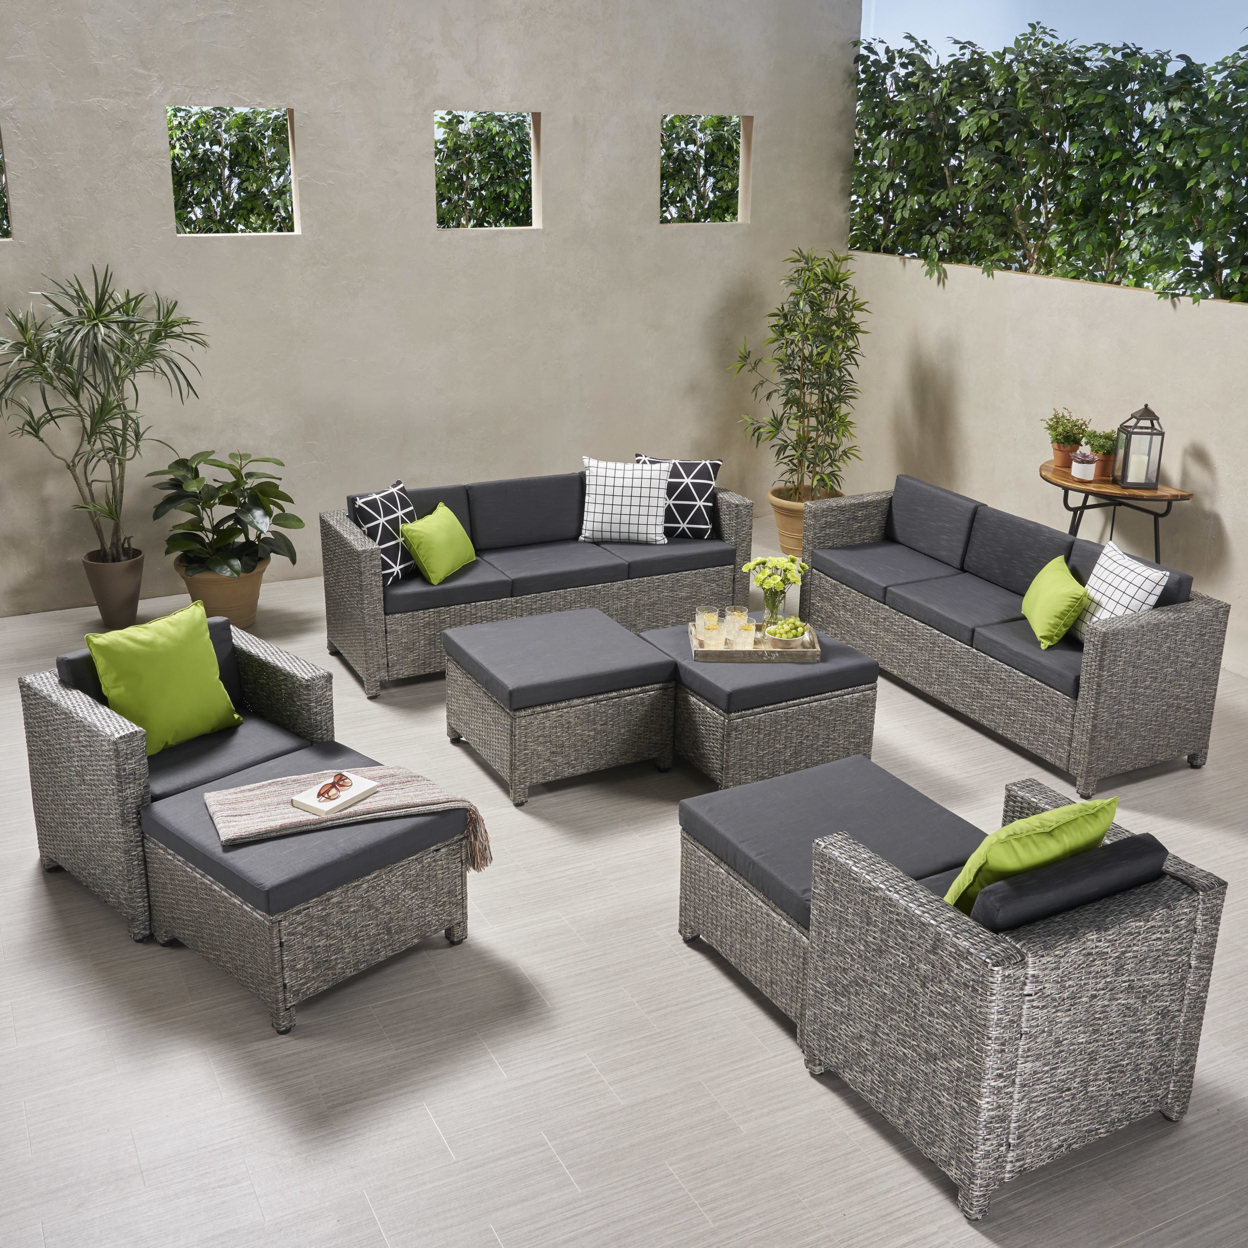 Hulda Outdoor 8 Seater Wicker Chat Set With Ottomans - Mix Black + Dark Gray